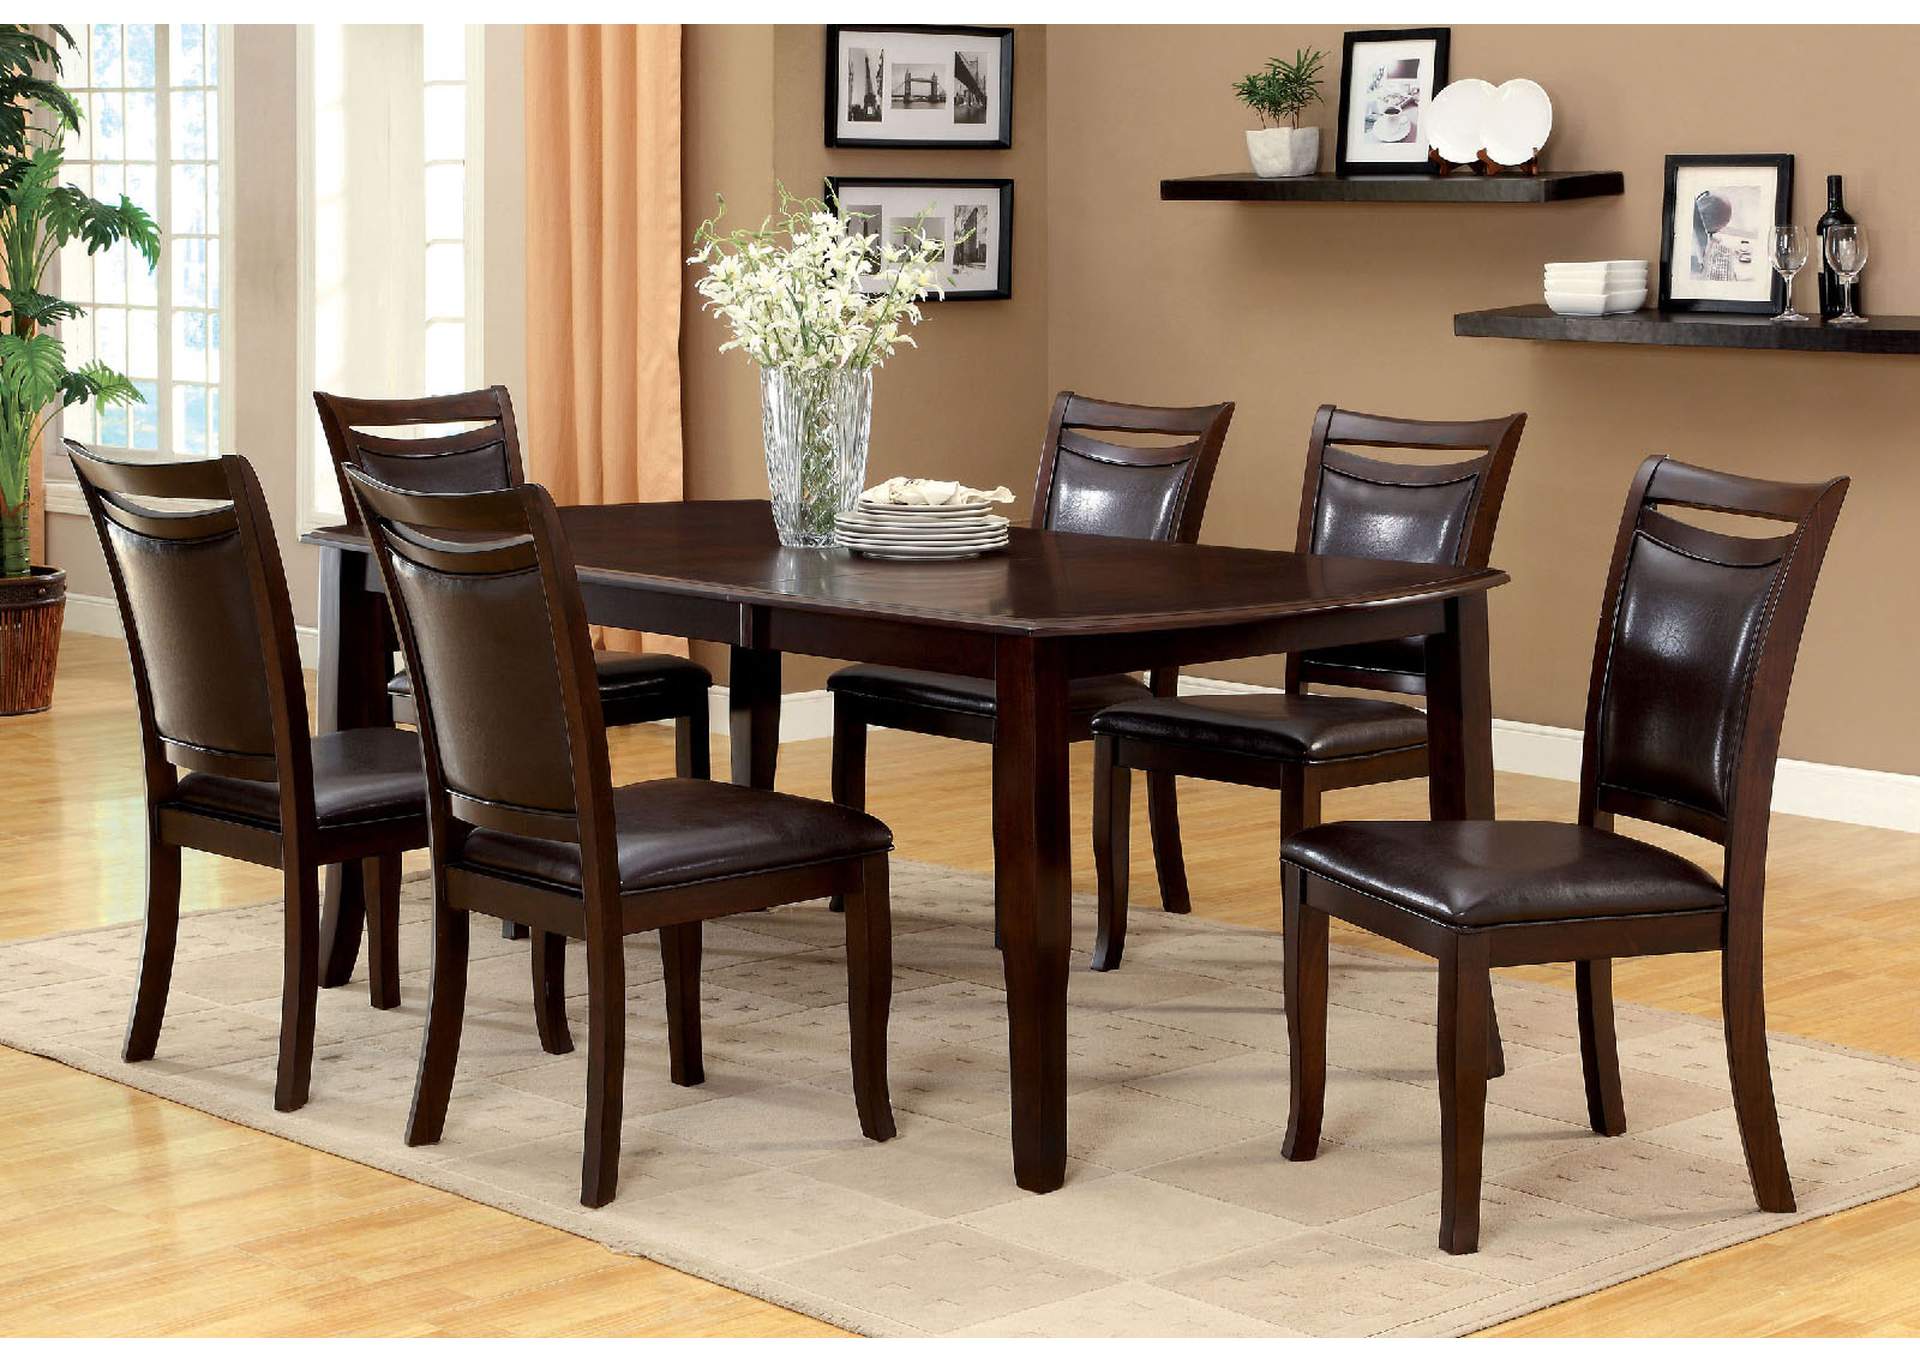 Woodside Dark Cherry Extension Leaf Dining Table w/4 Side Chair